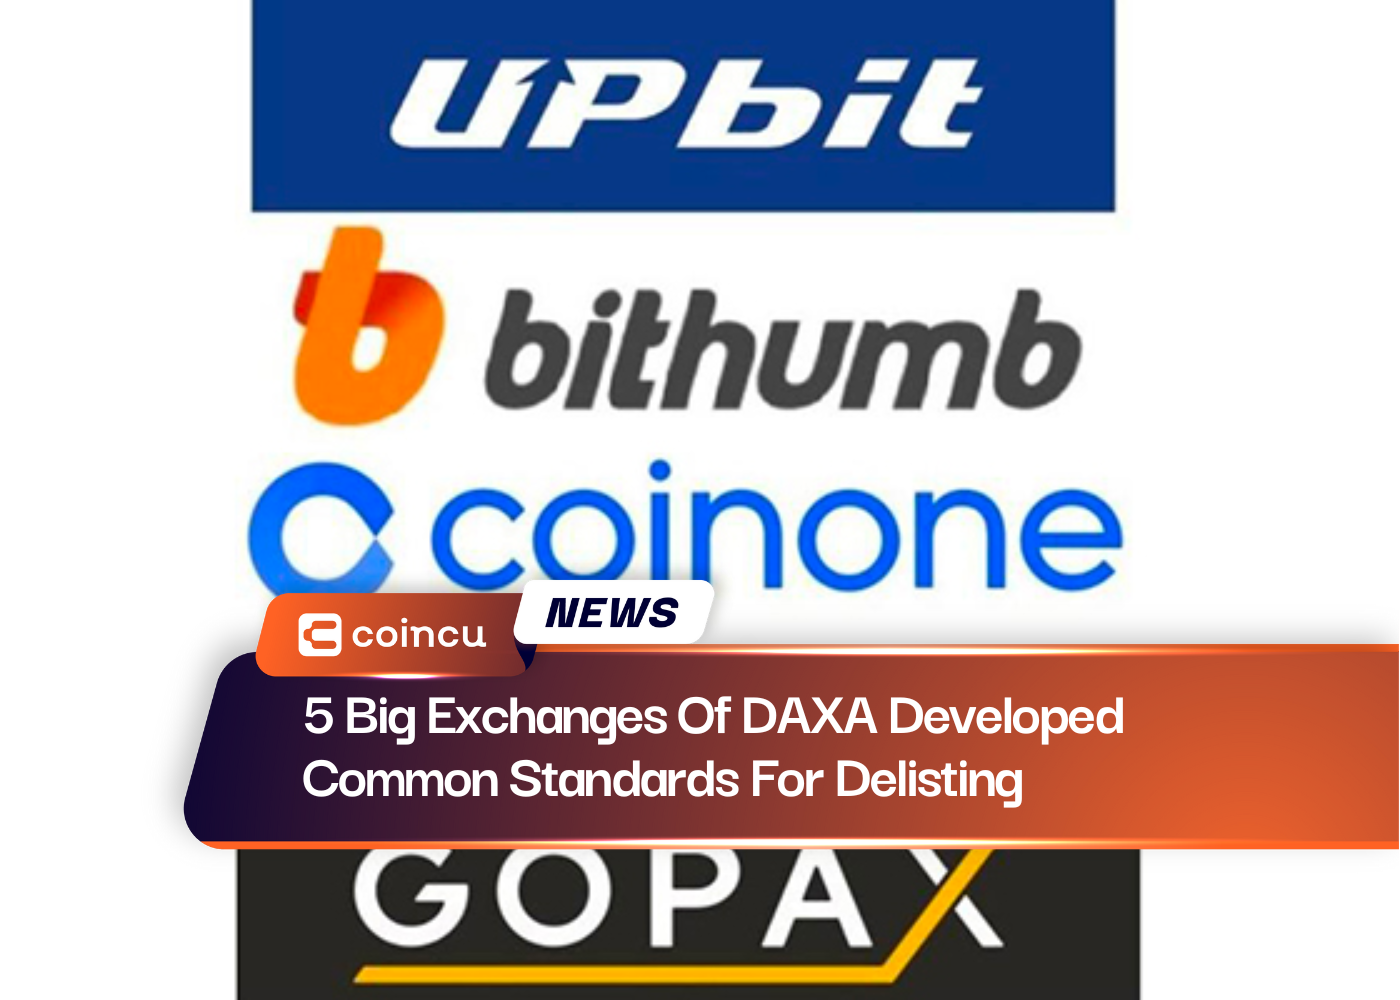 5 Big Exchanges Of DAXA Developed Common Standards For Delisting